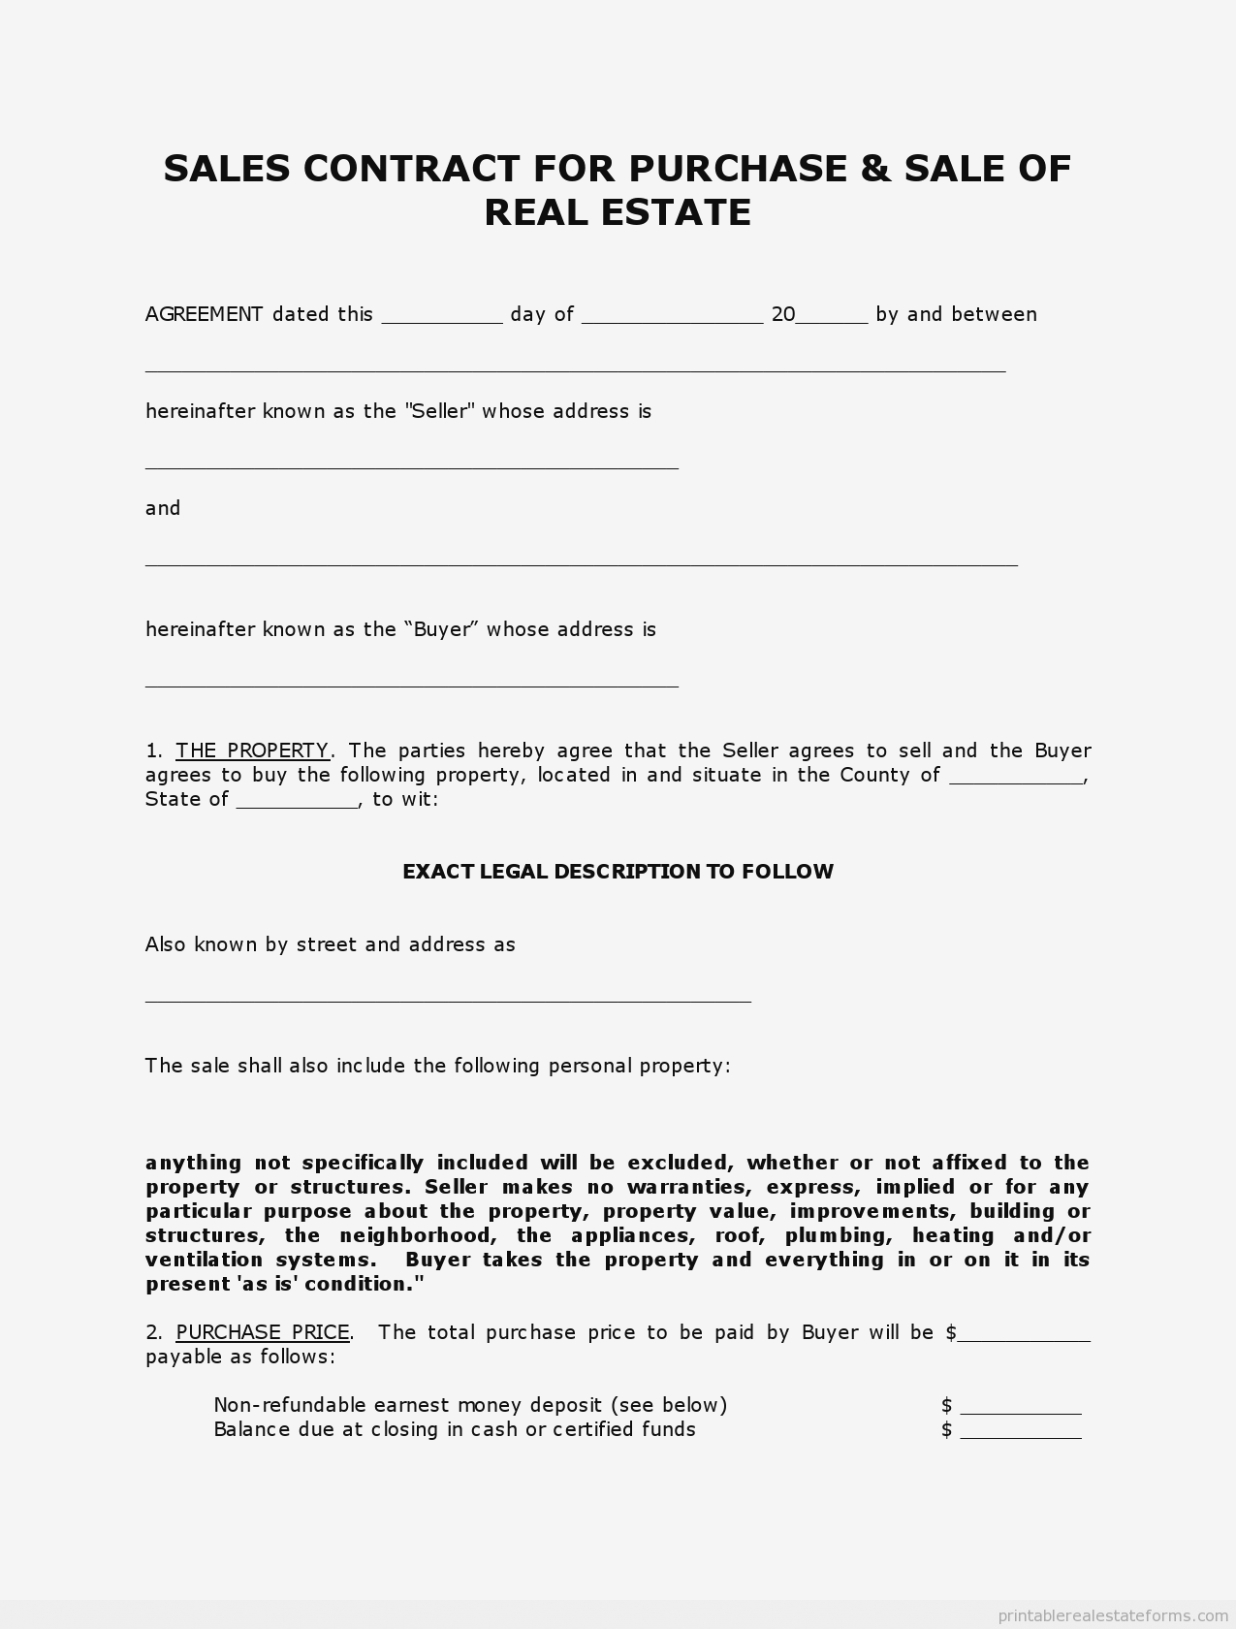 Indiana Real Estate Purchase Agreement 10 Simple Free Printable - Free Printable Real Estate Forms